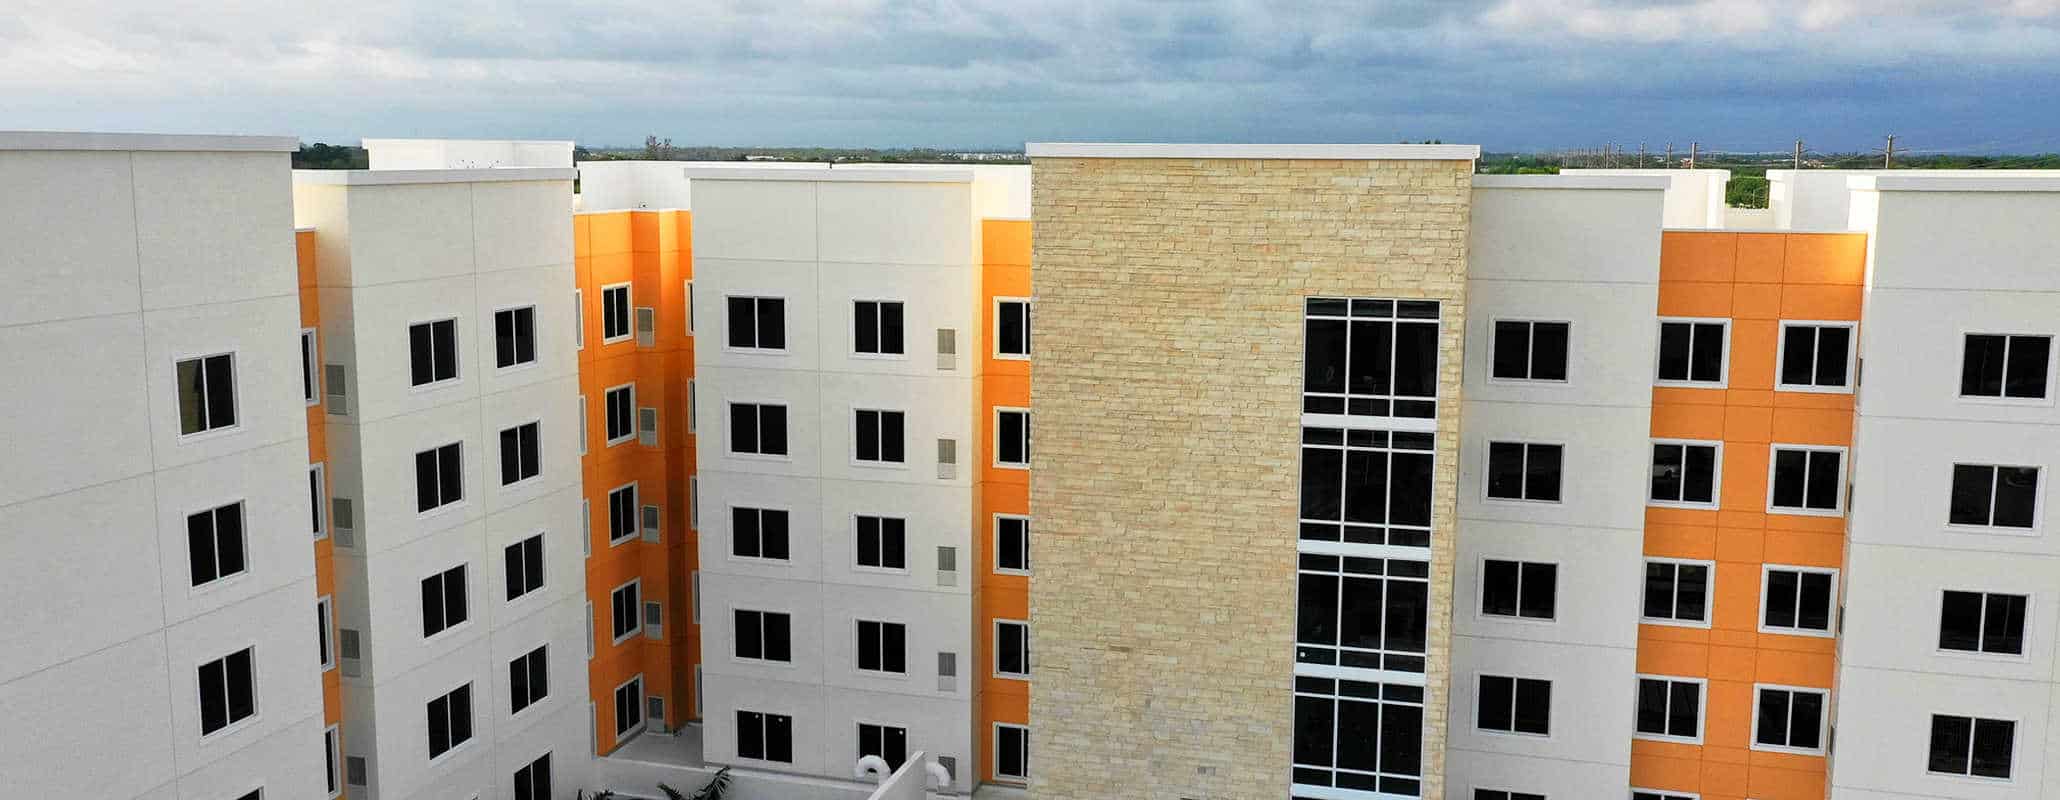 Multi-level orange building with grey outsets and stone accents, FS-300 Impact front set double panel windows with aluminum framing by Aldora, grid curtain wall windows in stone accent section of building